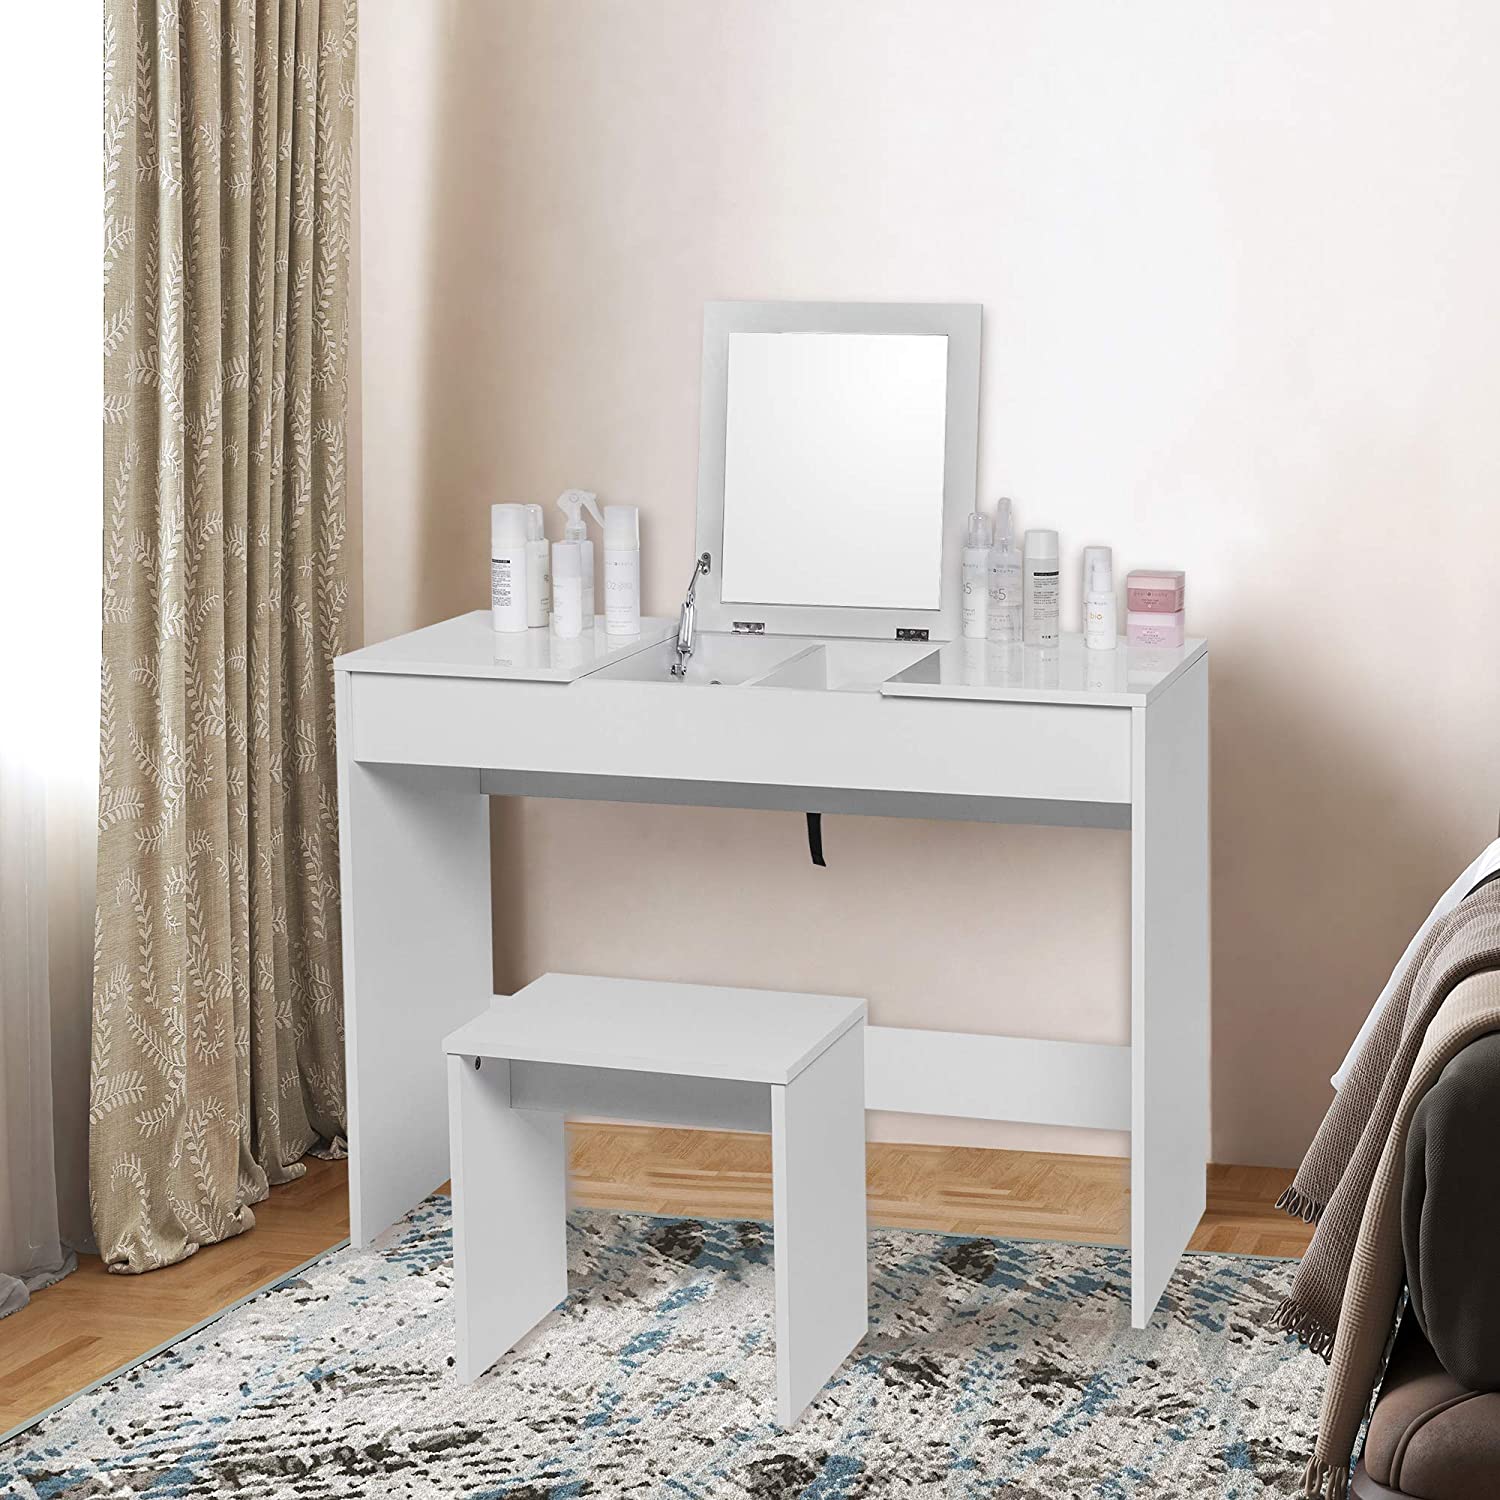 make-up table with stool, foldable mirror, high-gloss top